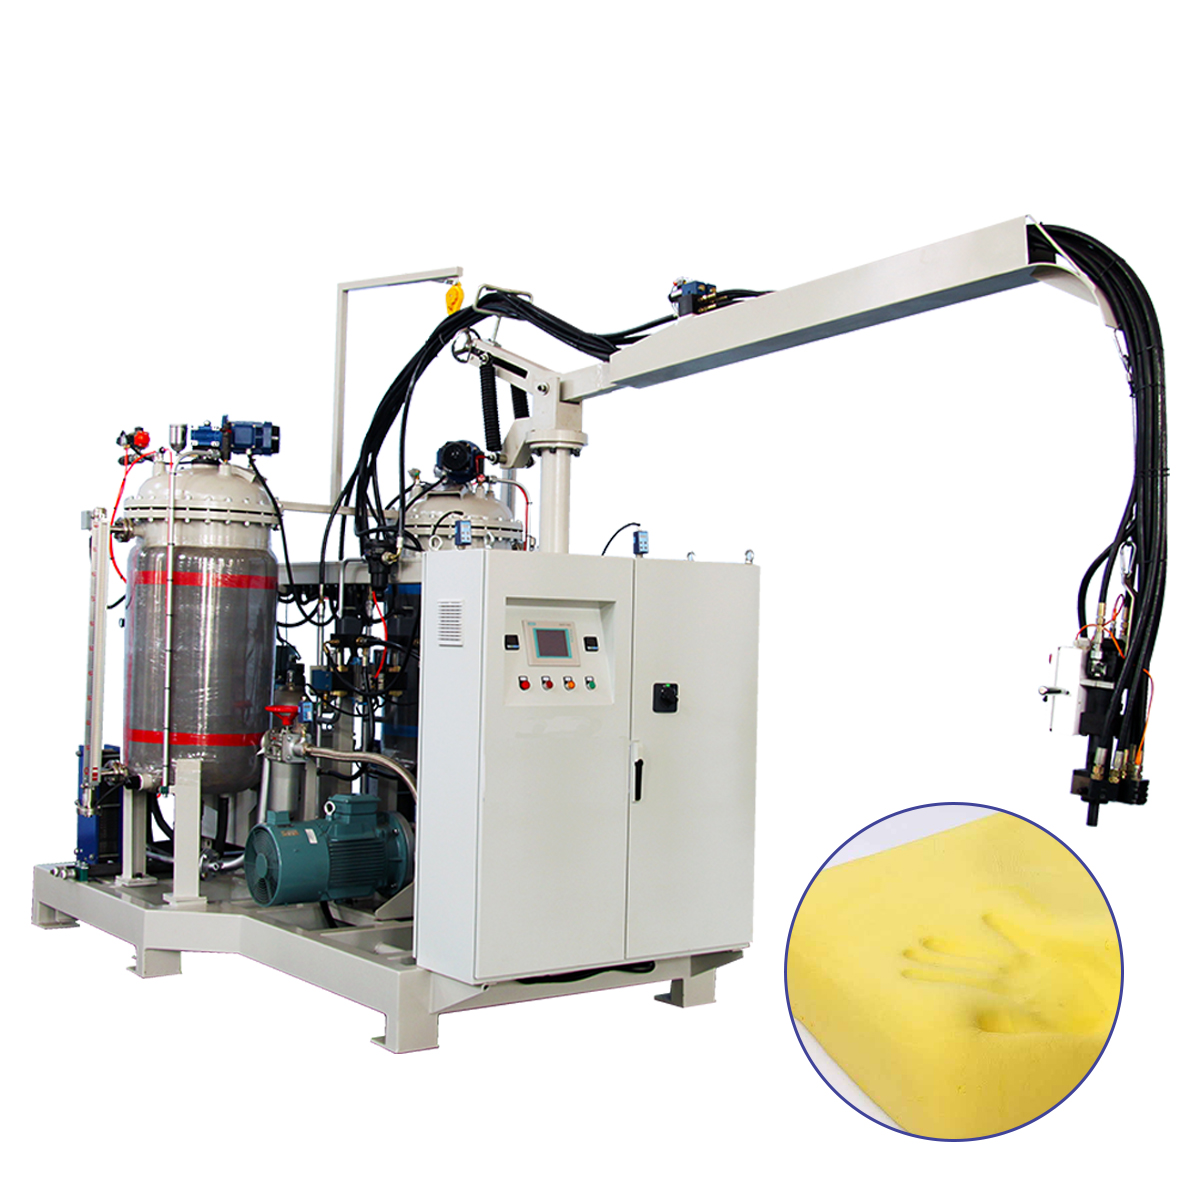 Polyurethane High Preasure Foaming Machine For Memory Foam Pillow Featured Image